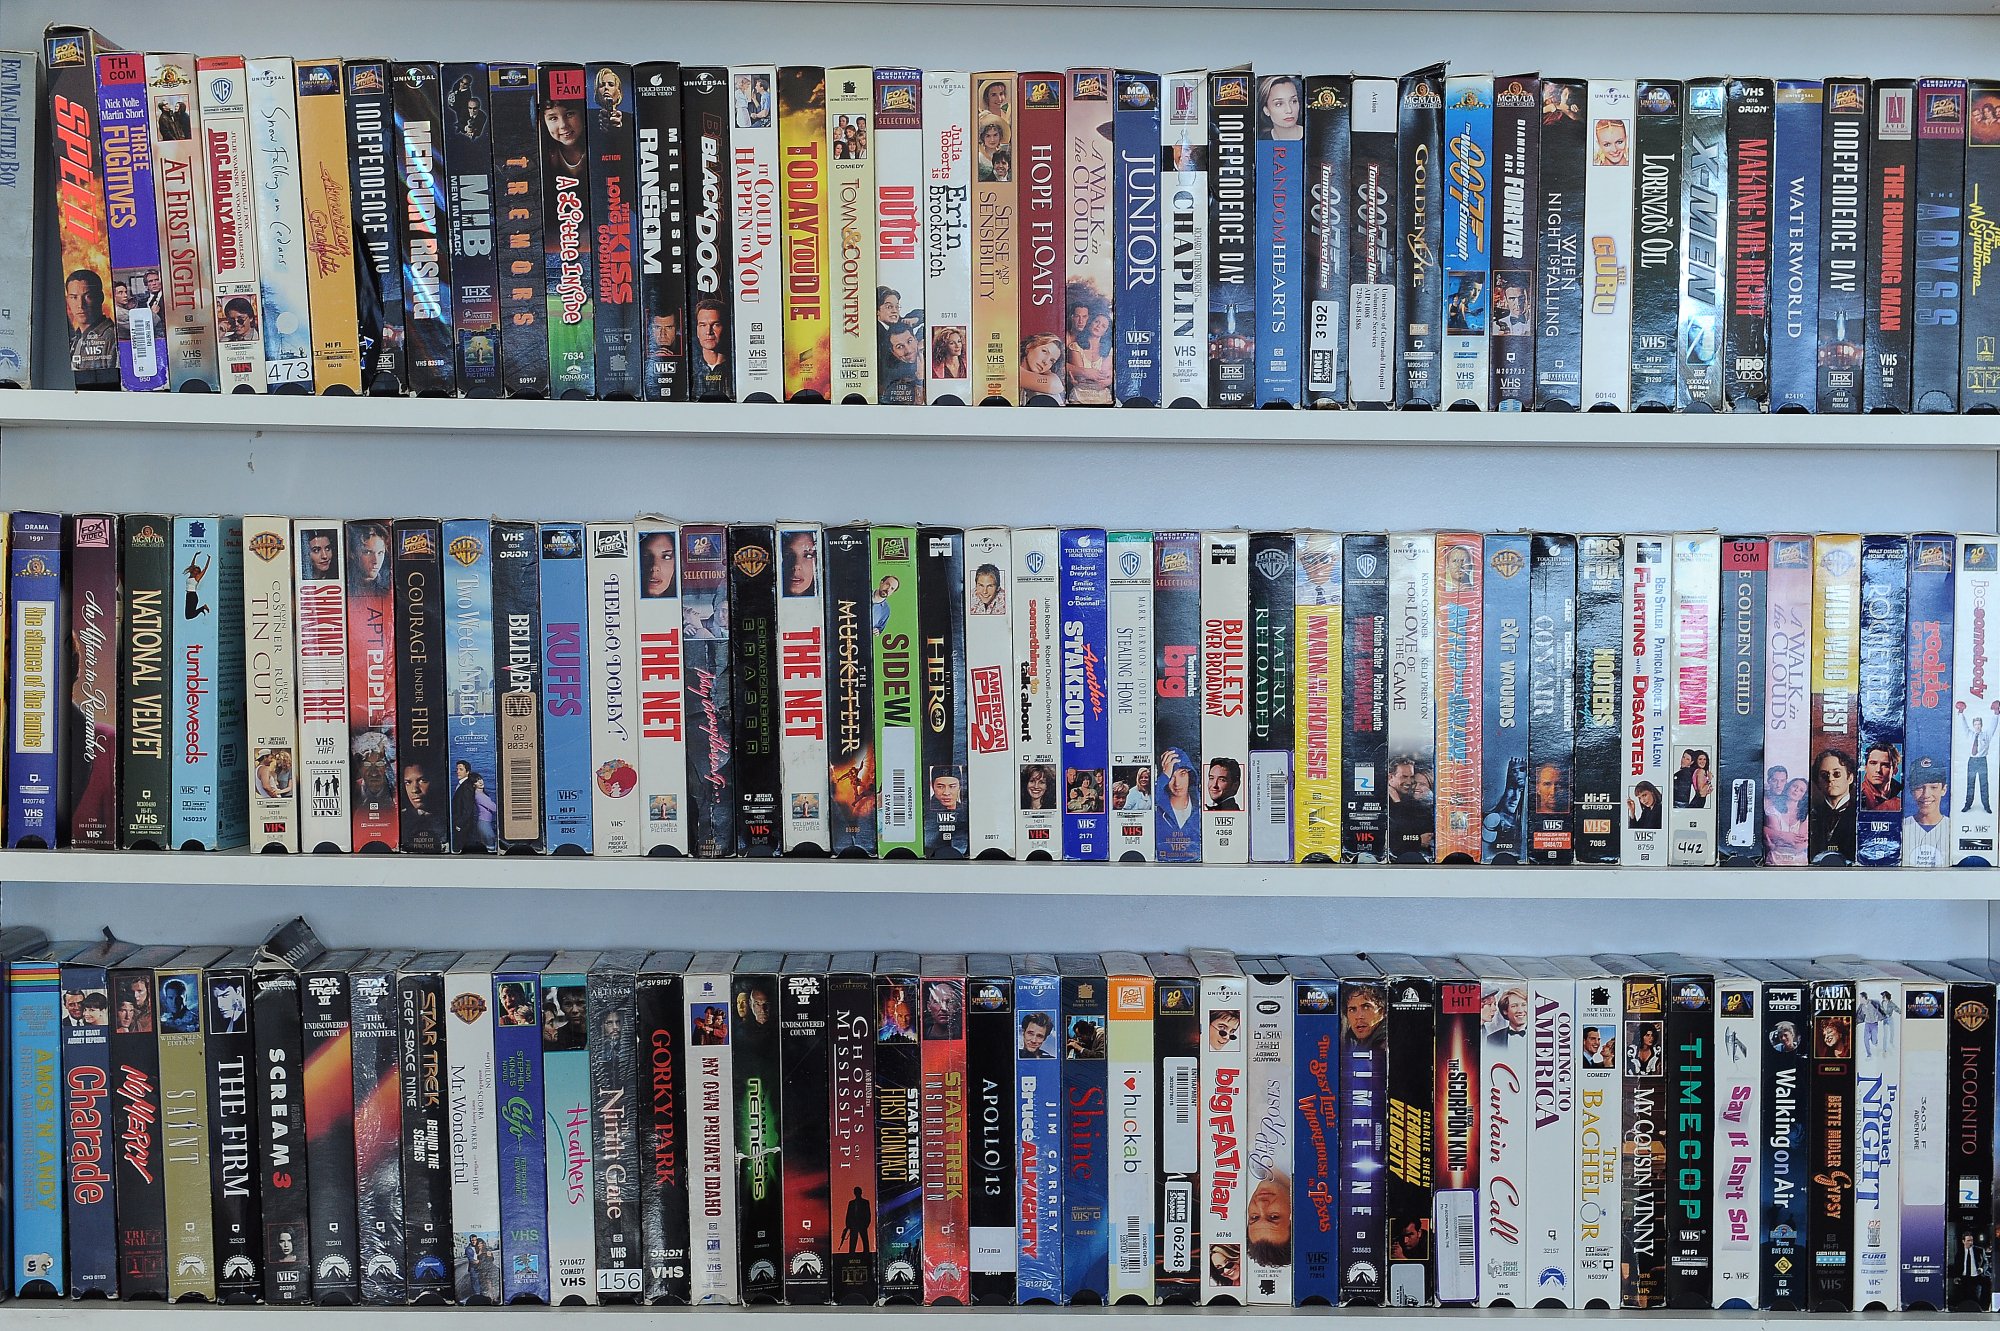 Three shelves of VHS tapes.